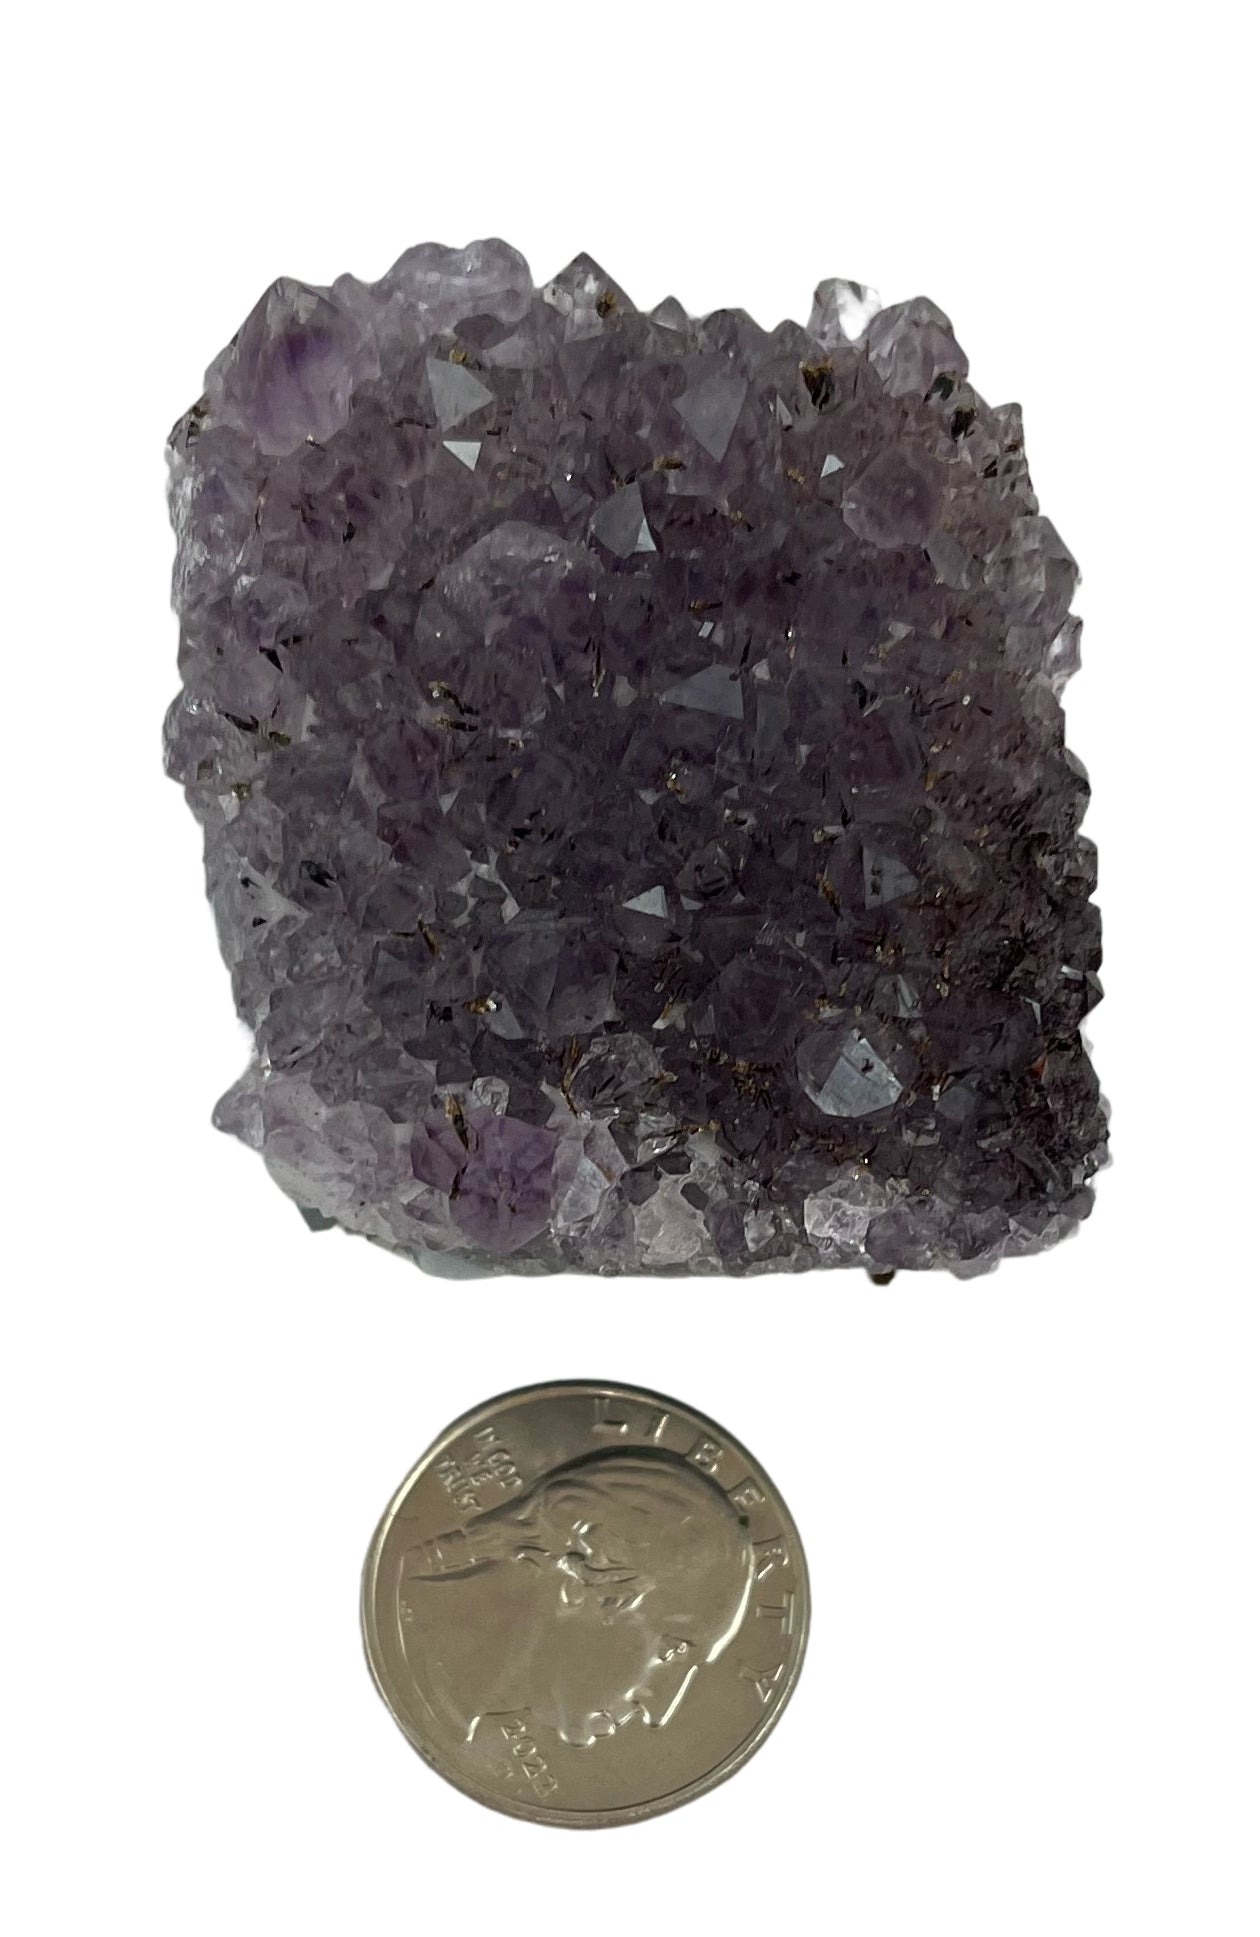 Smaller than palm size purple crystal, roughly 2 in by 2 in 